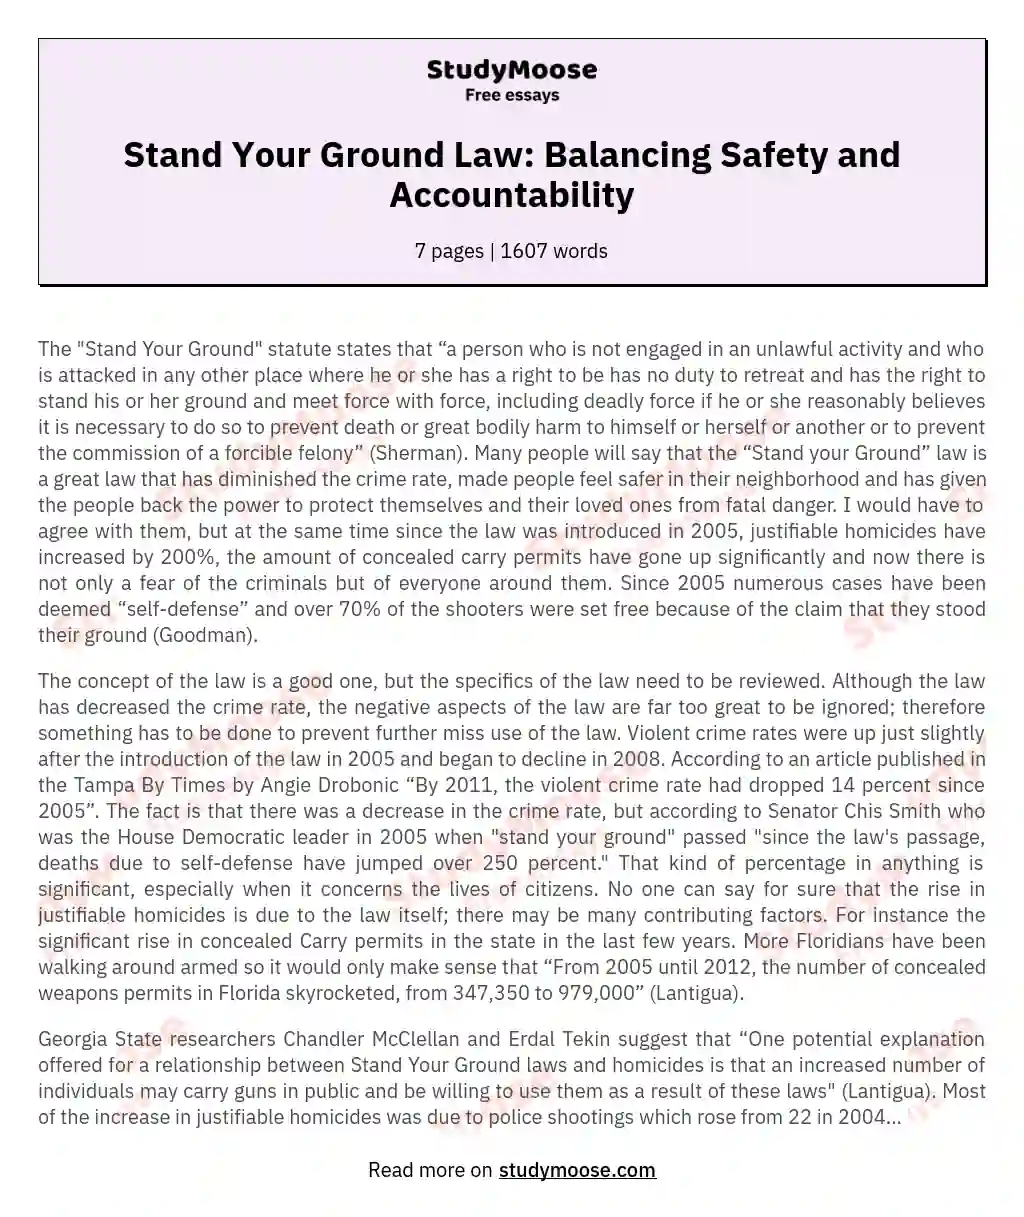 Stand Your Ground Law: Balancing Safety and Accountability essay